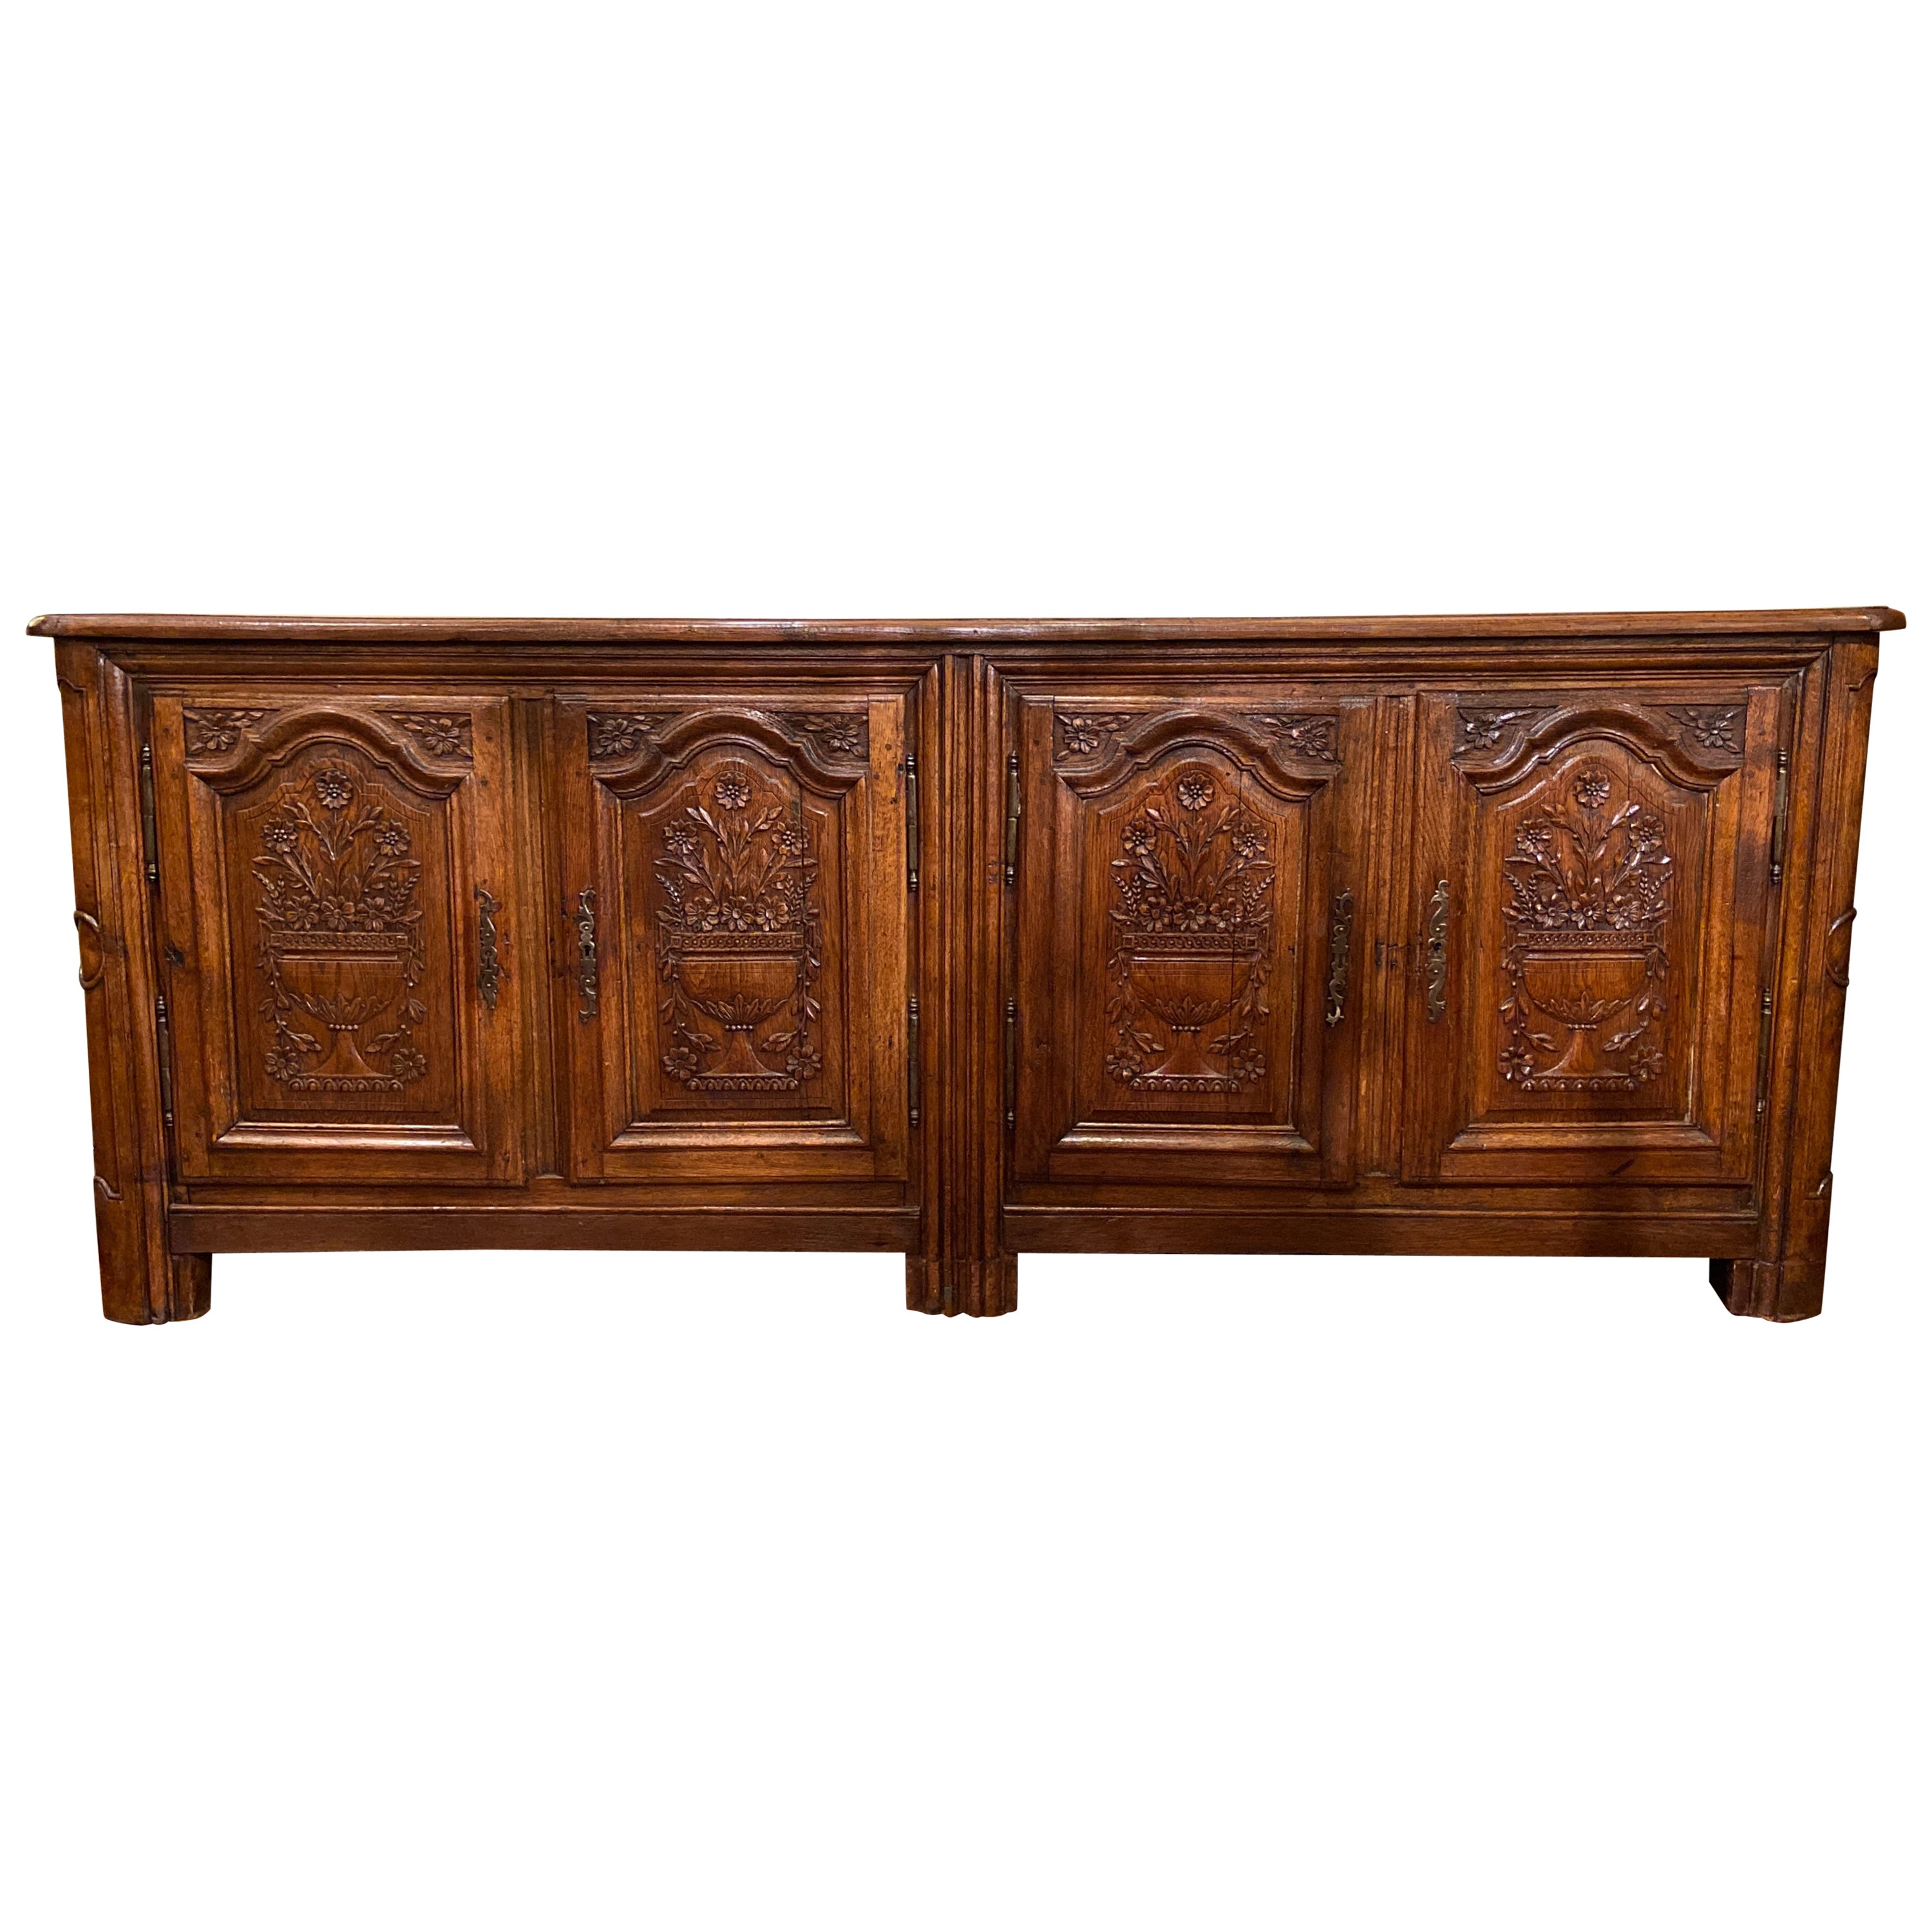 Antique French Provincial Carved Oak Sideboard, Circa 1860 For Sale